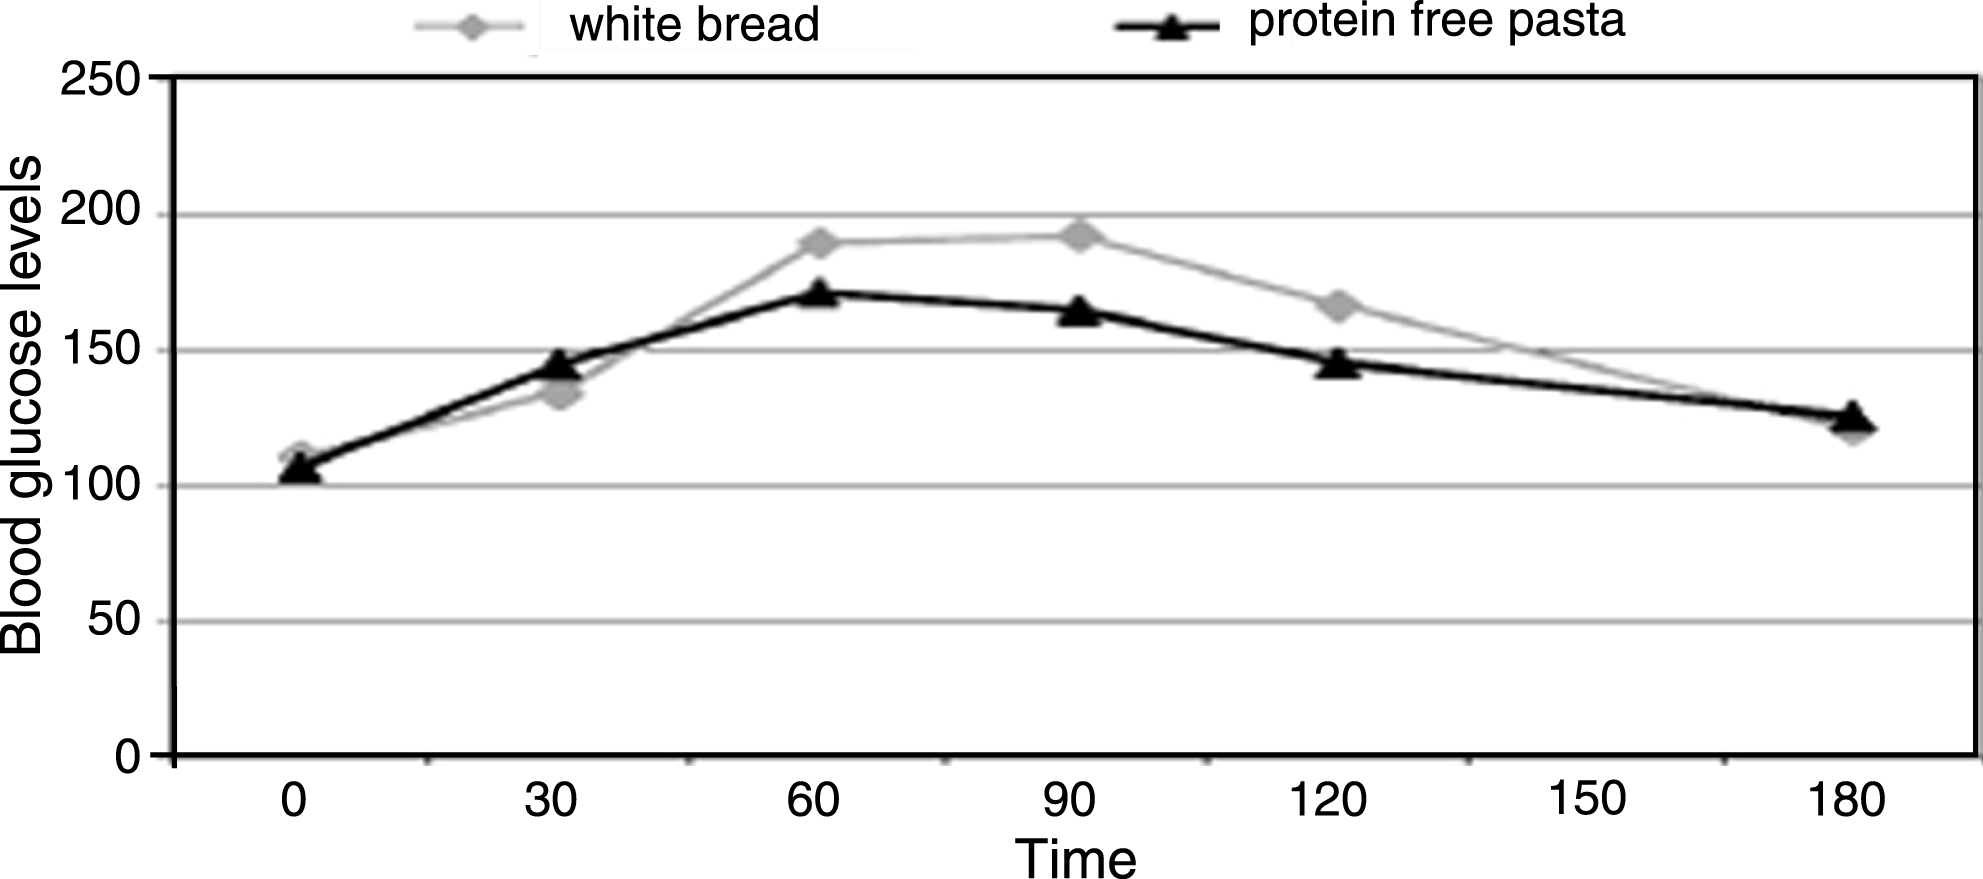 PF pasta induces a significant early blood glucose increase at 30’ (p < 0.05), but significantly lower values at 90’ and 120’ vs the reference food (p < 0.05).